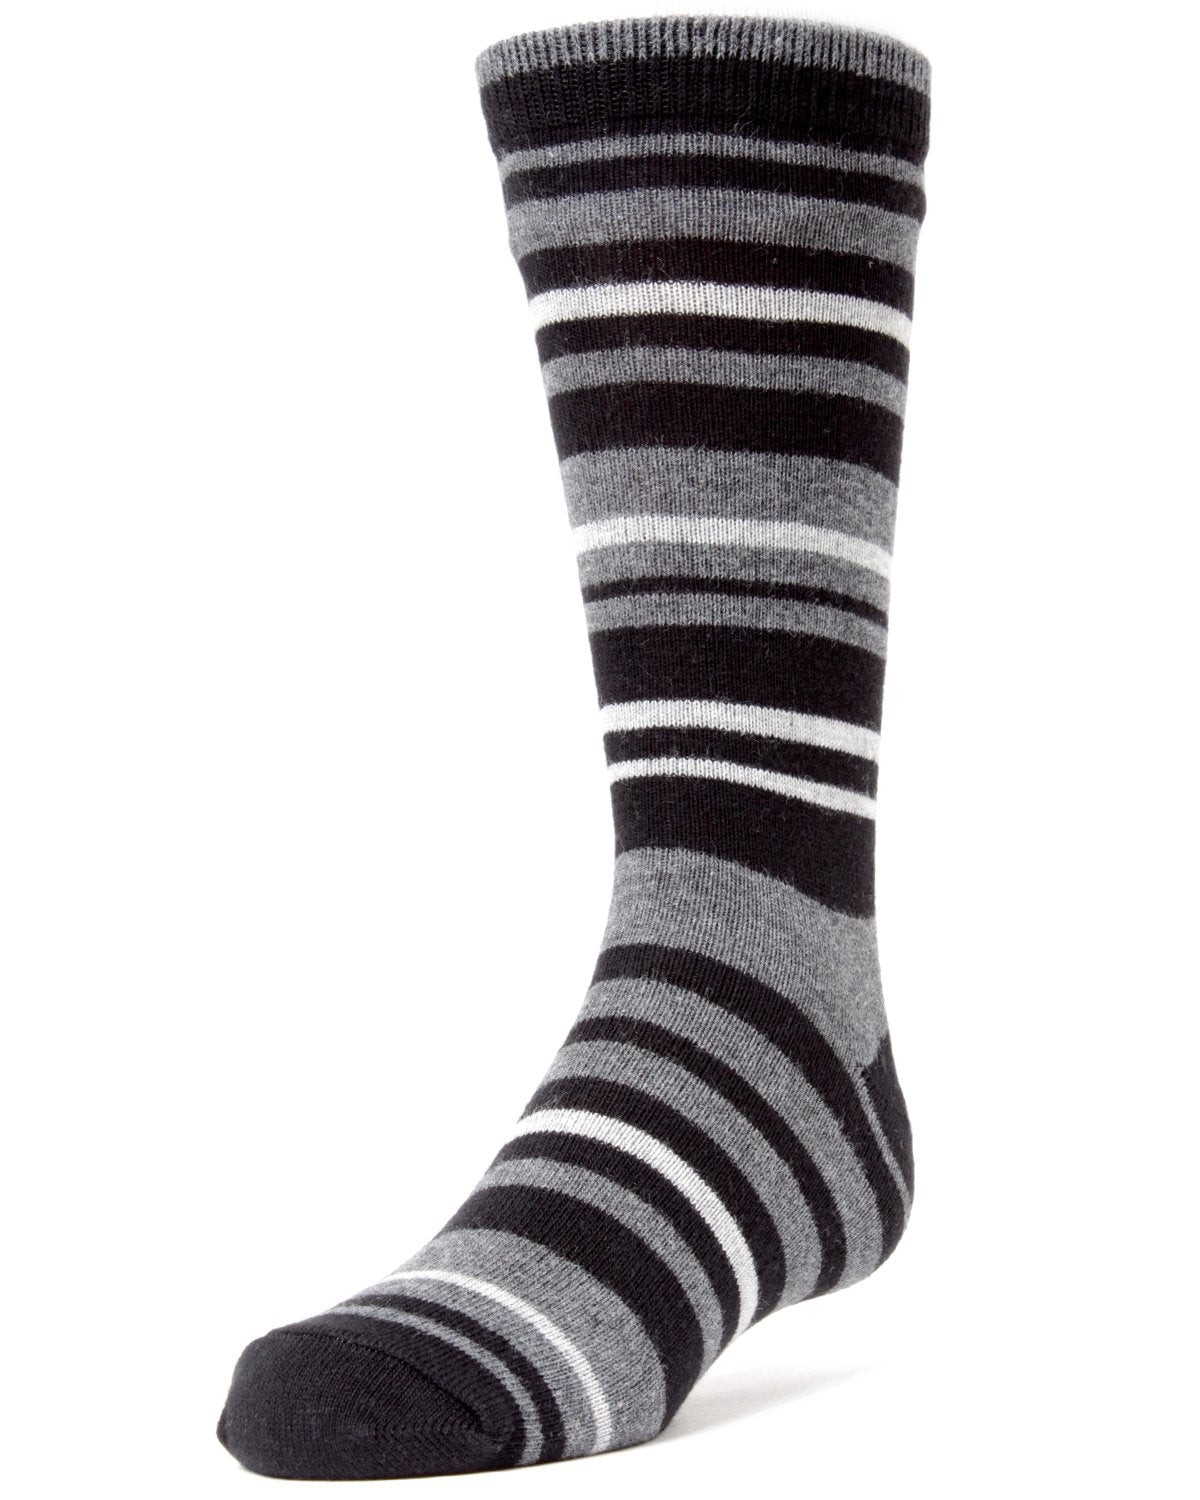 Rings and Rungs Boys Cotton Blend Striped Socks